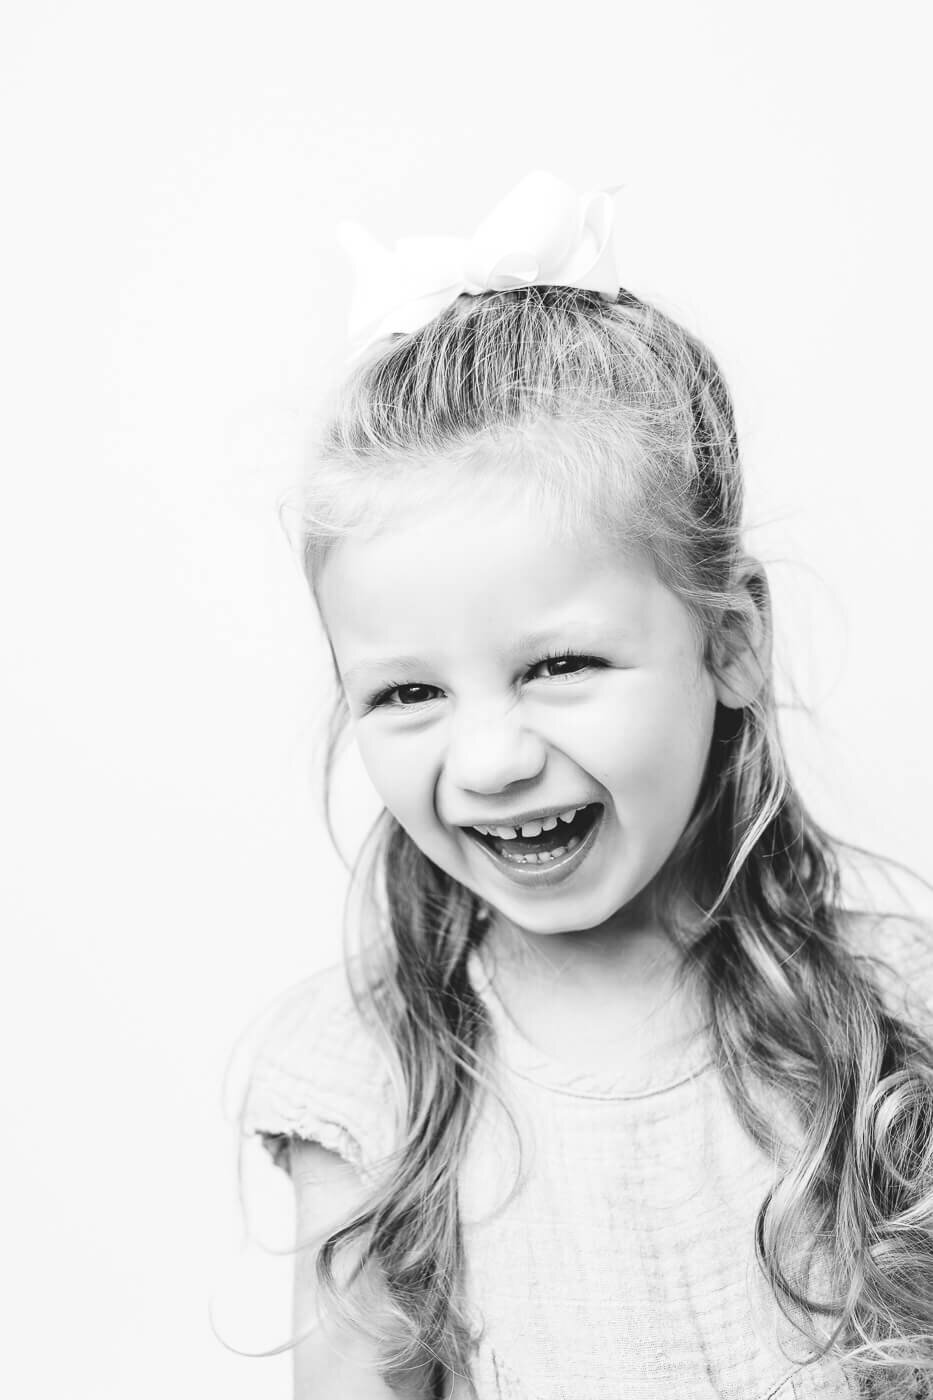 Monochrome of girl with hair up smiling ecstatically